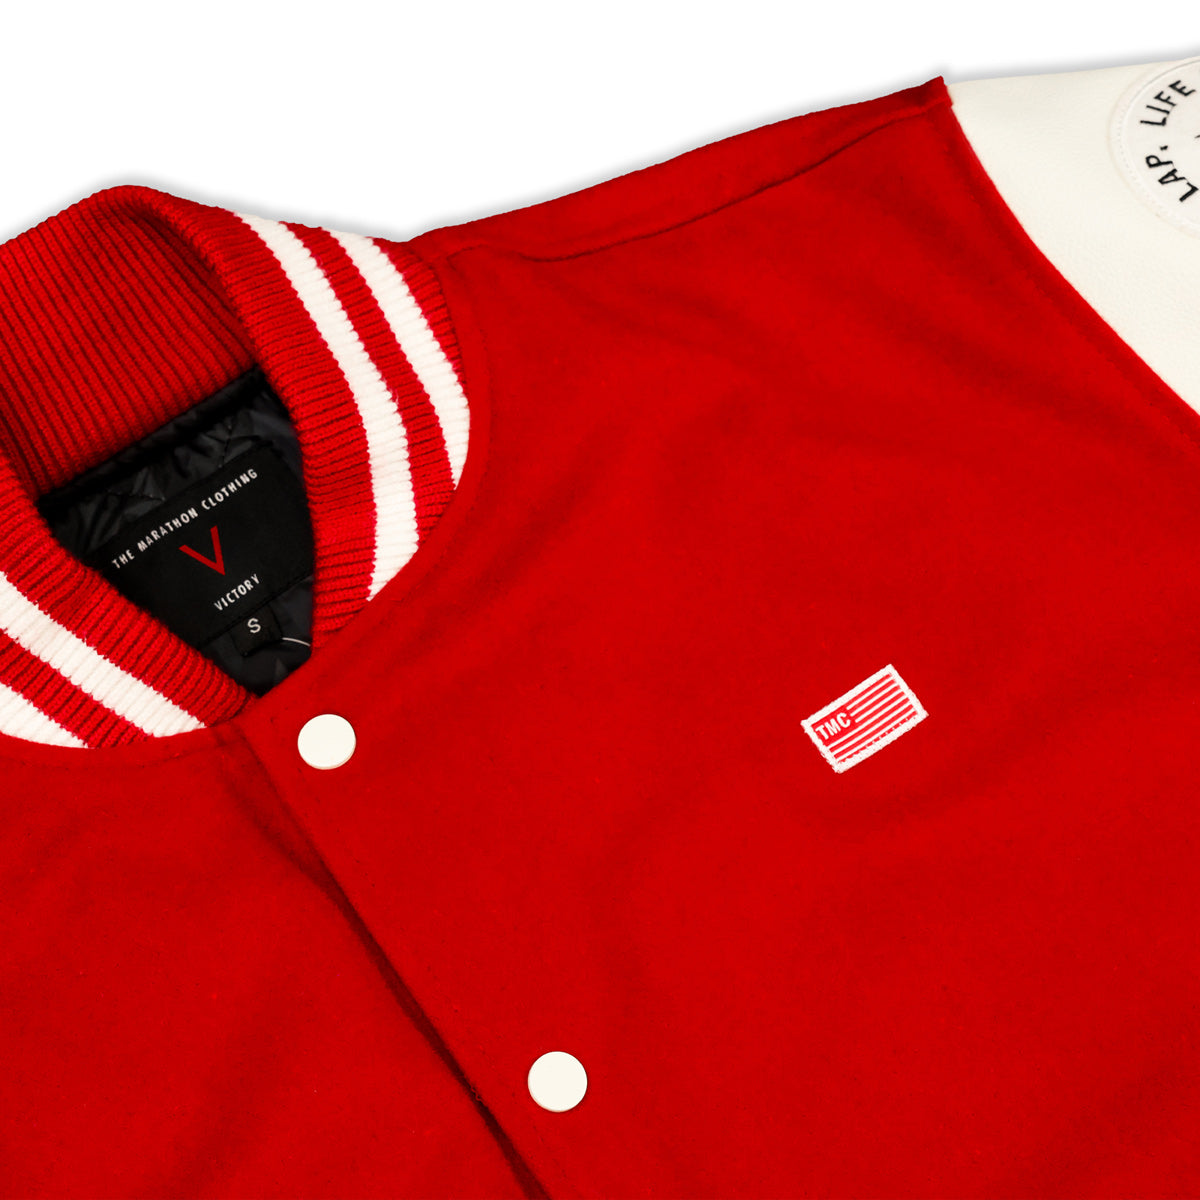 The Marathon Clothing - Crenshaw Letterman Jacket - Red - Chest Detail